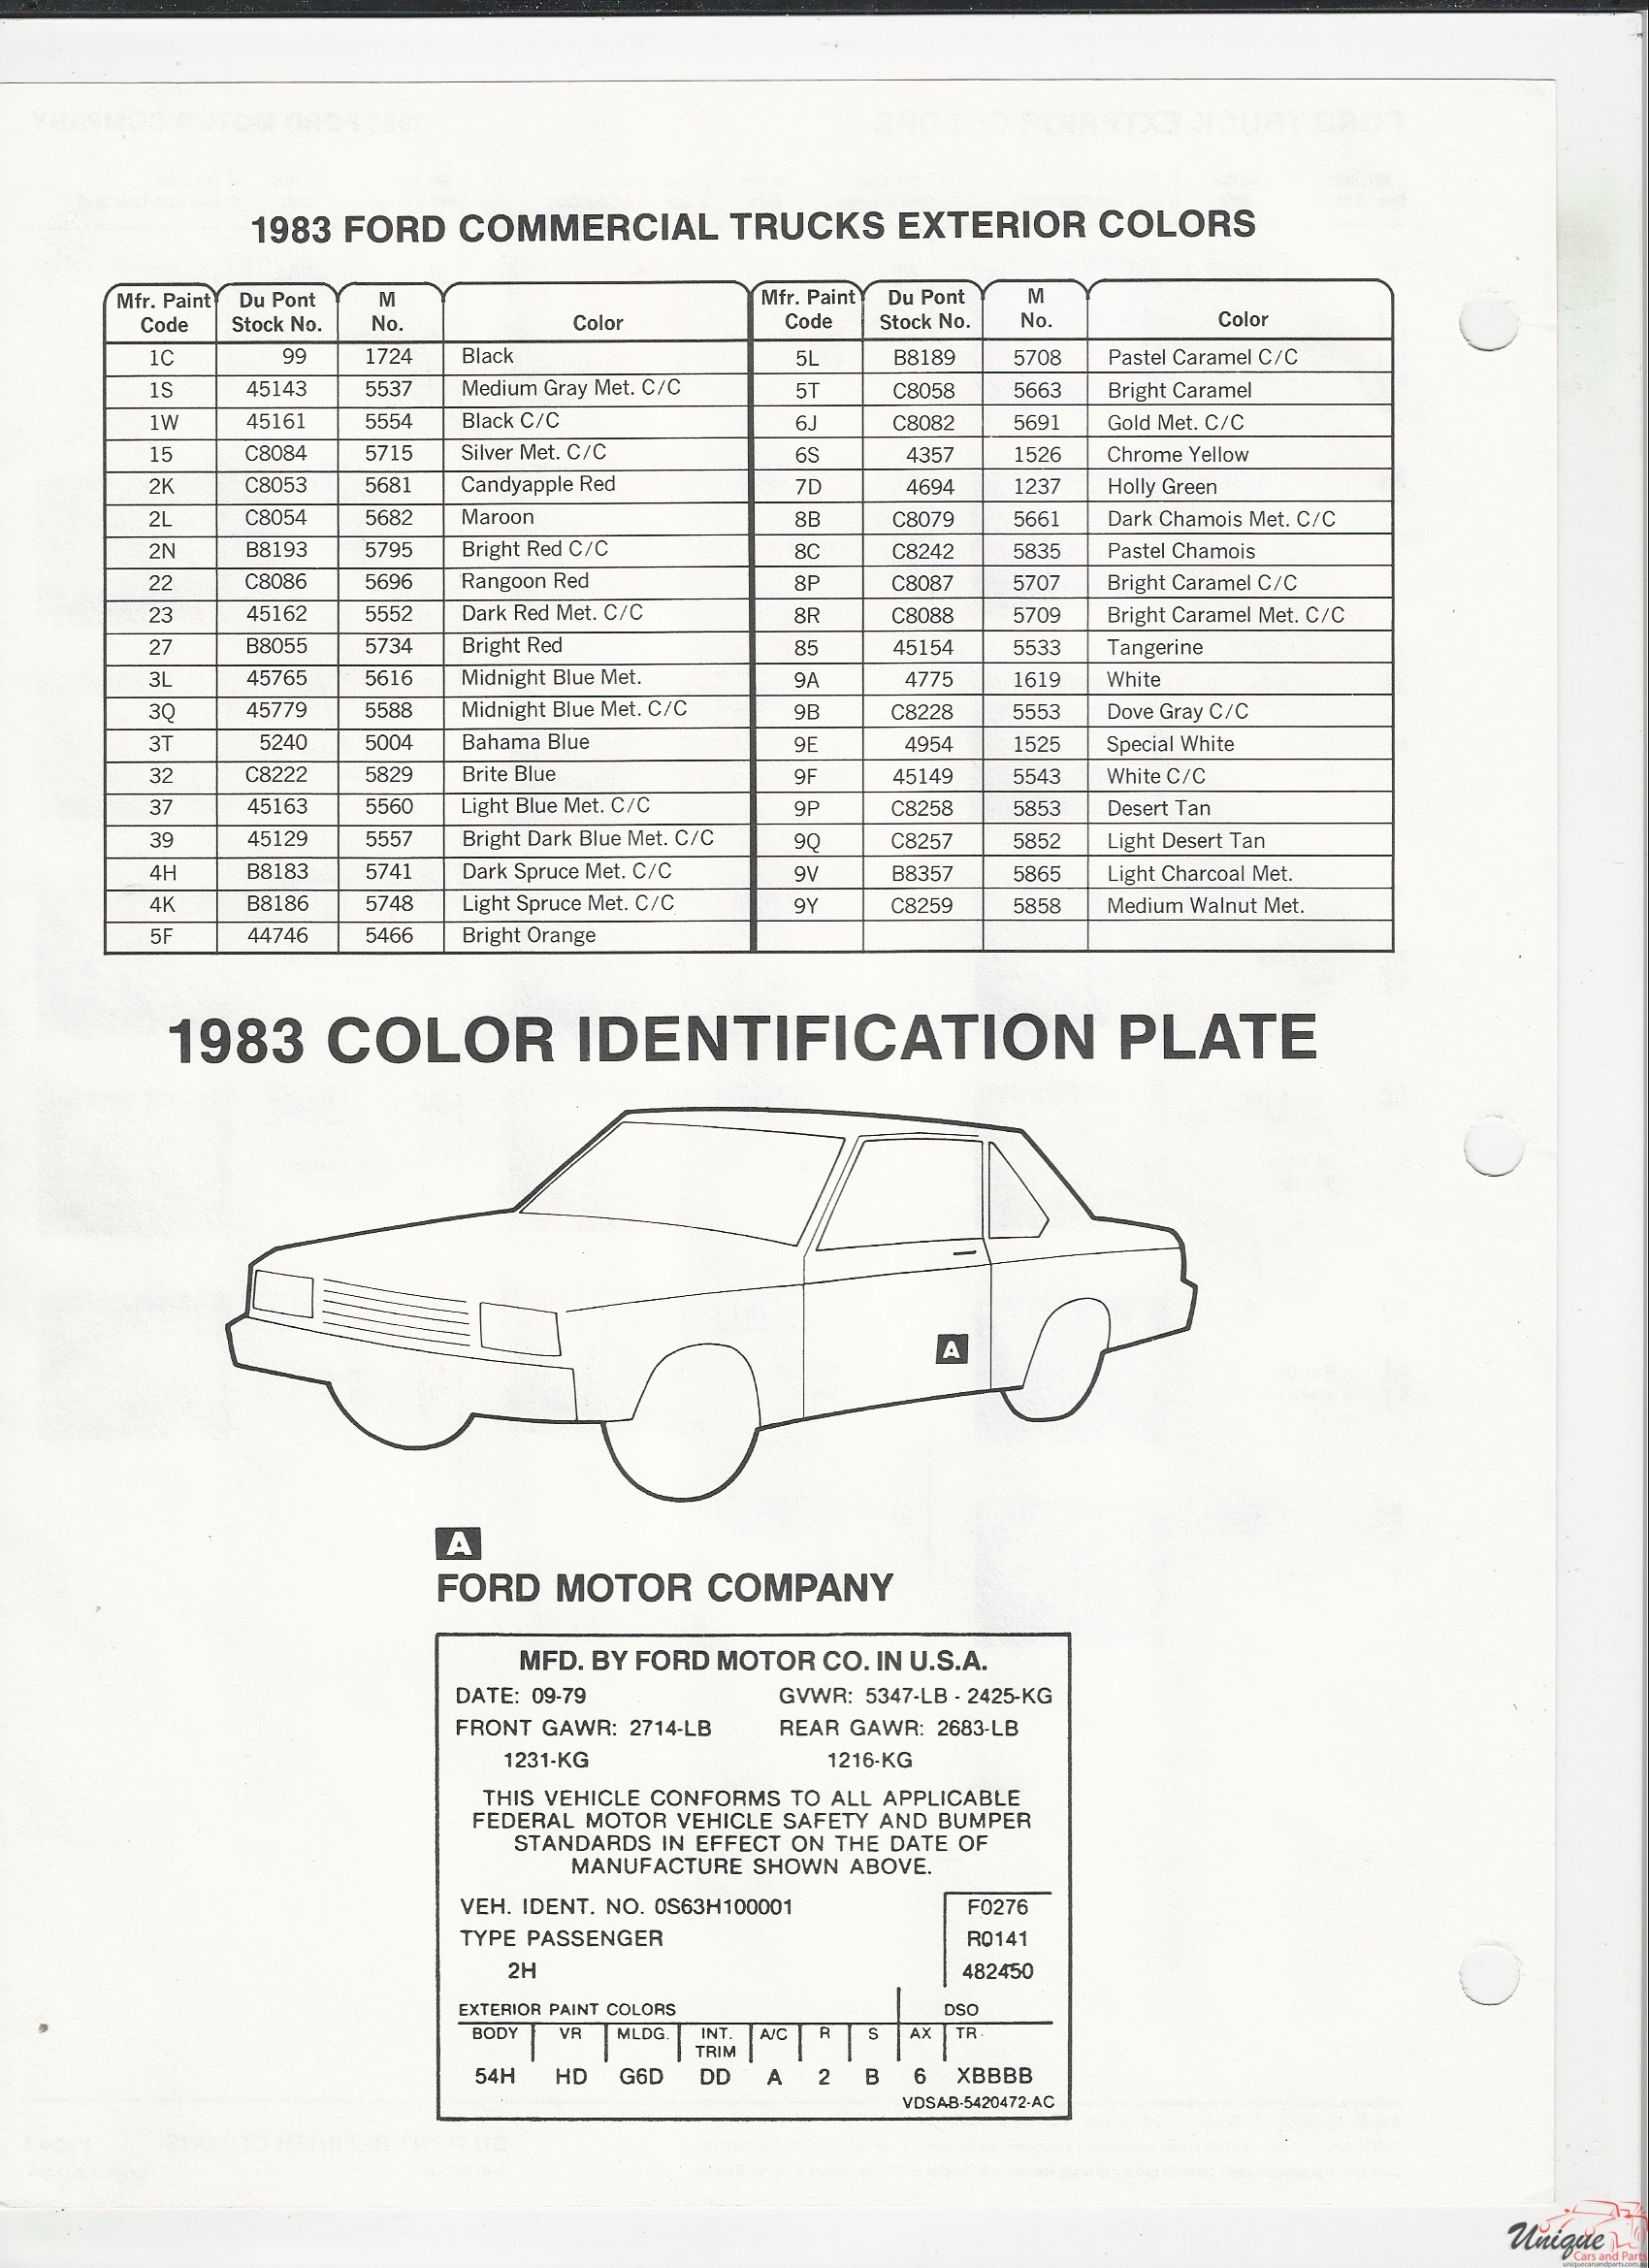 1983 Ford-9 Paint Charts